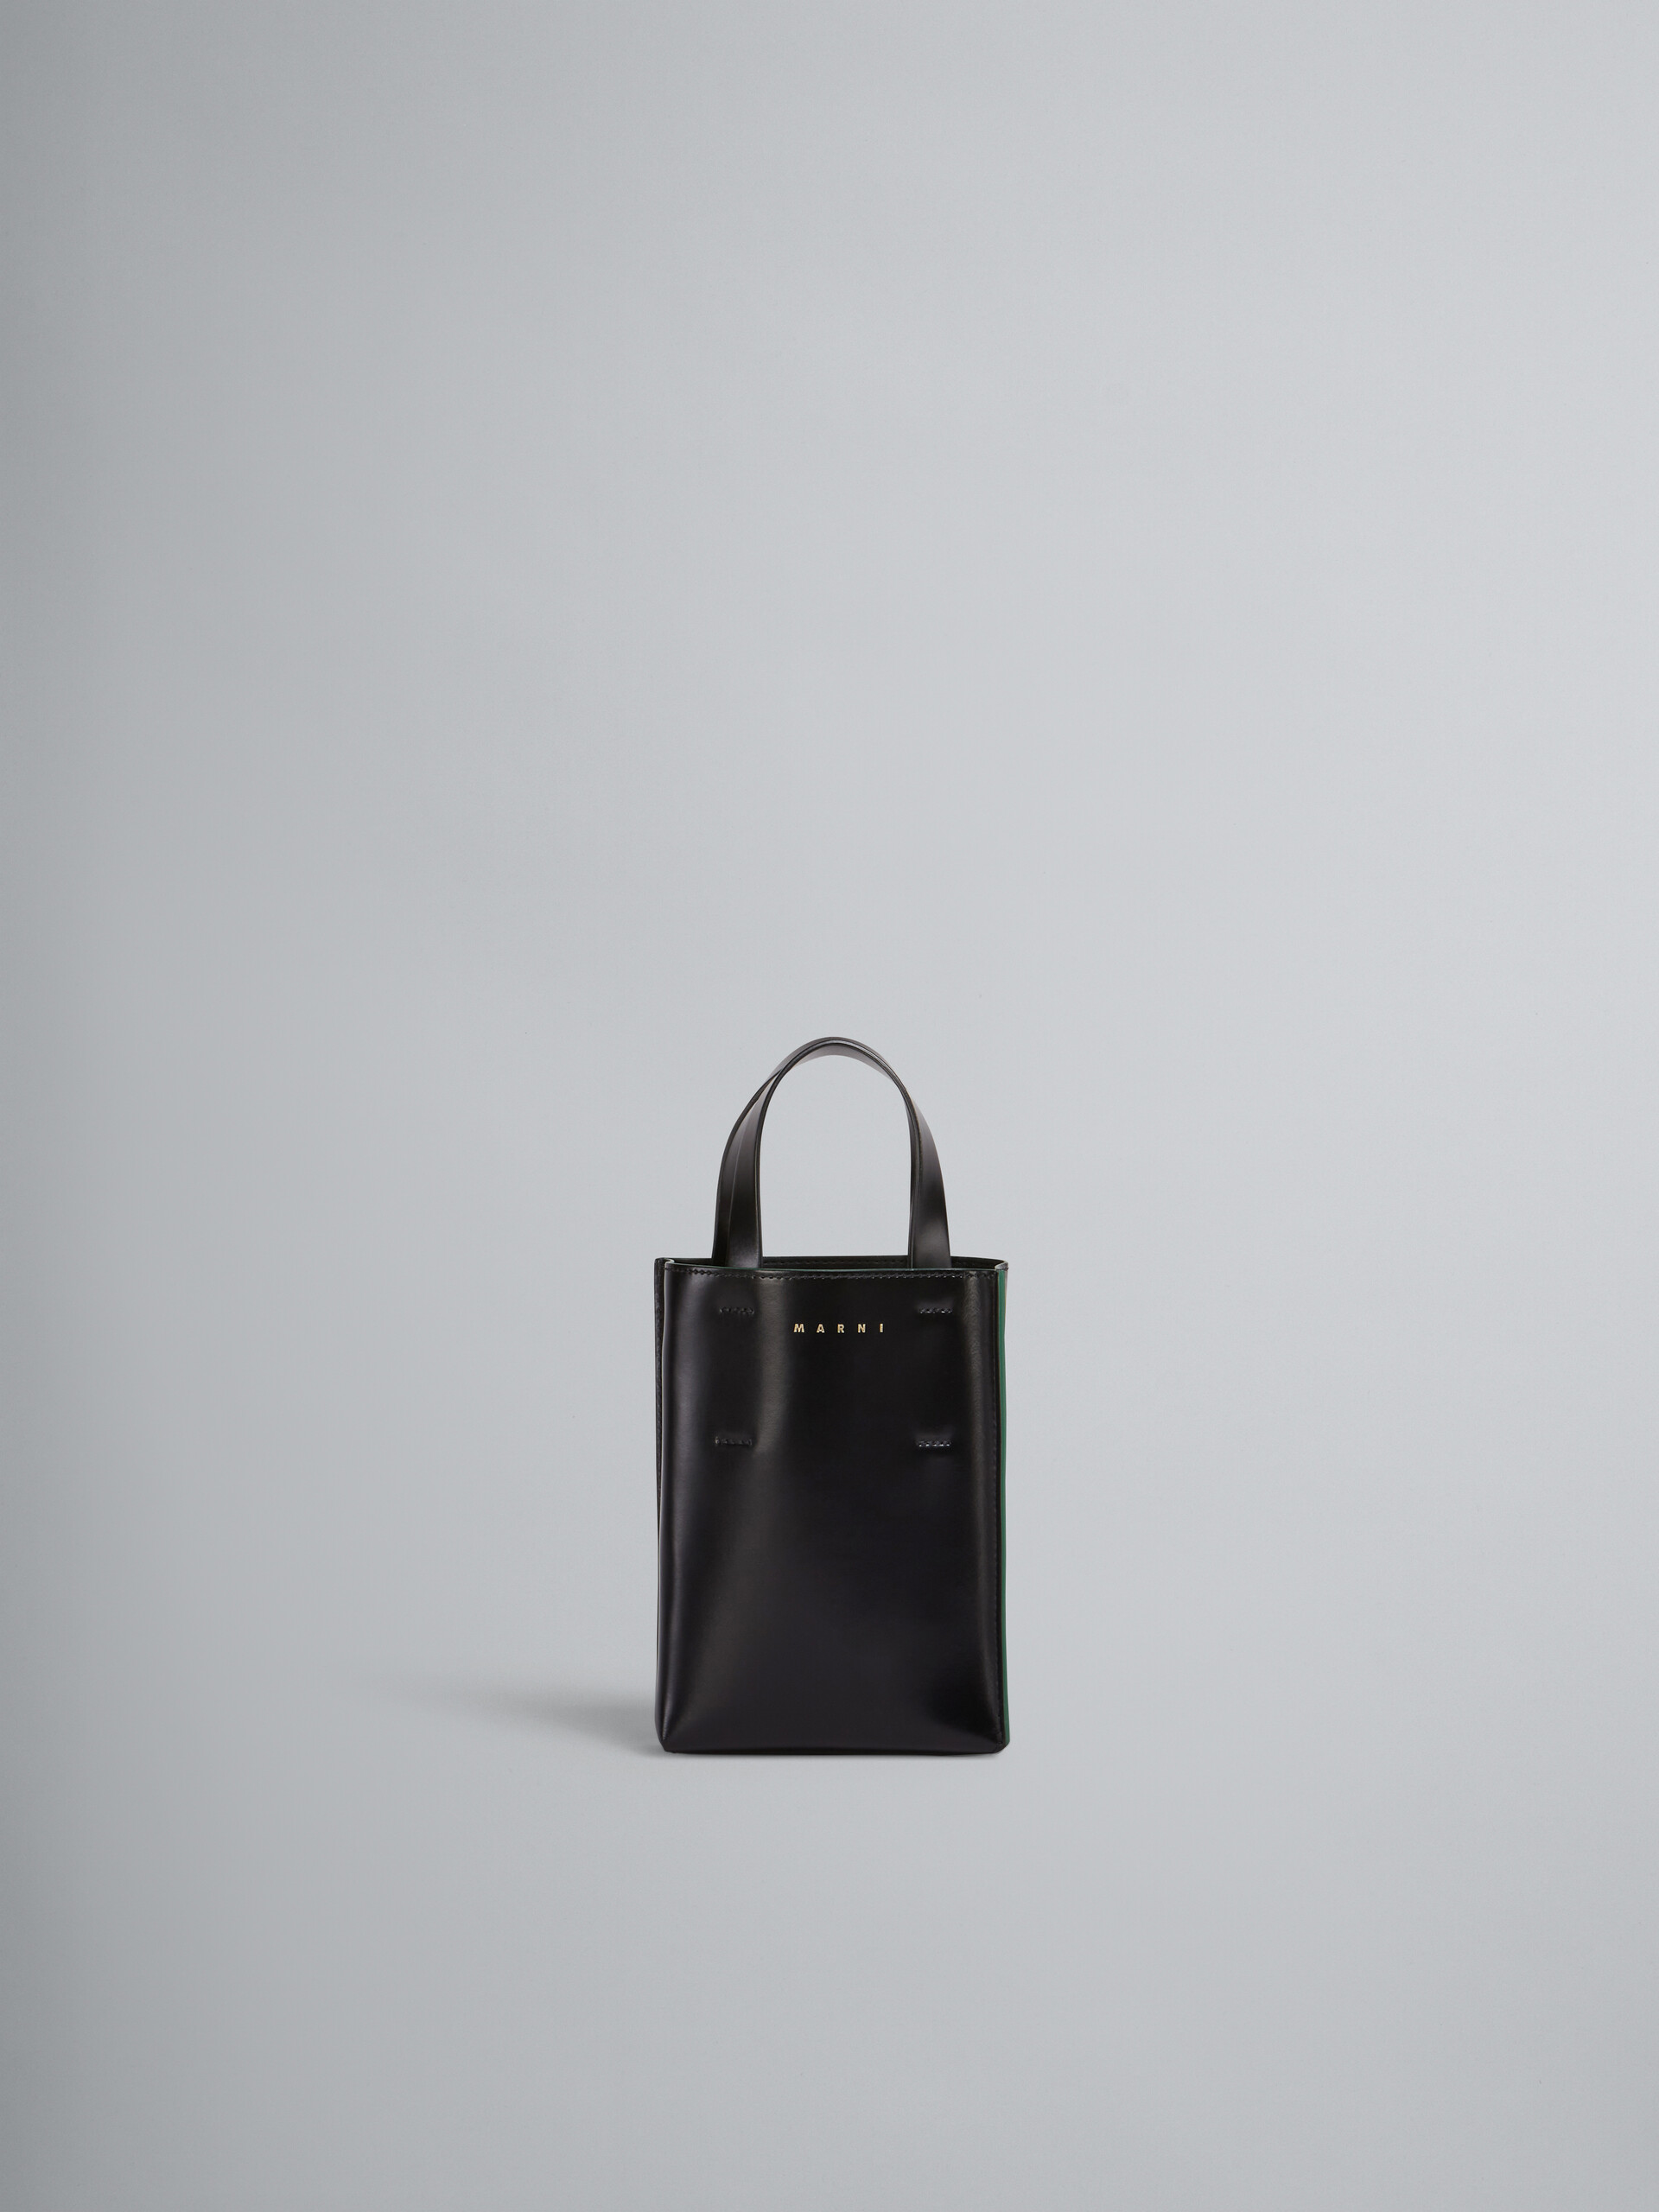 MUSEO nano bag in black shiny leather - Shopping Bags - Image 1